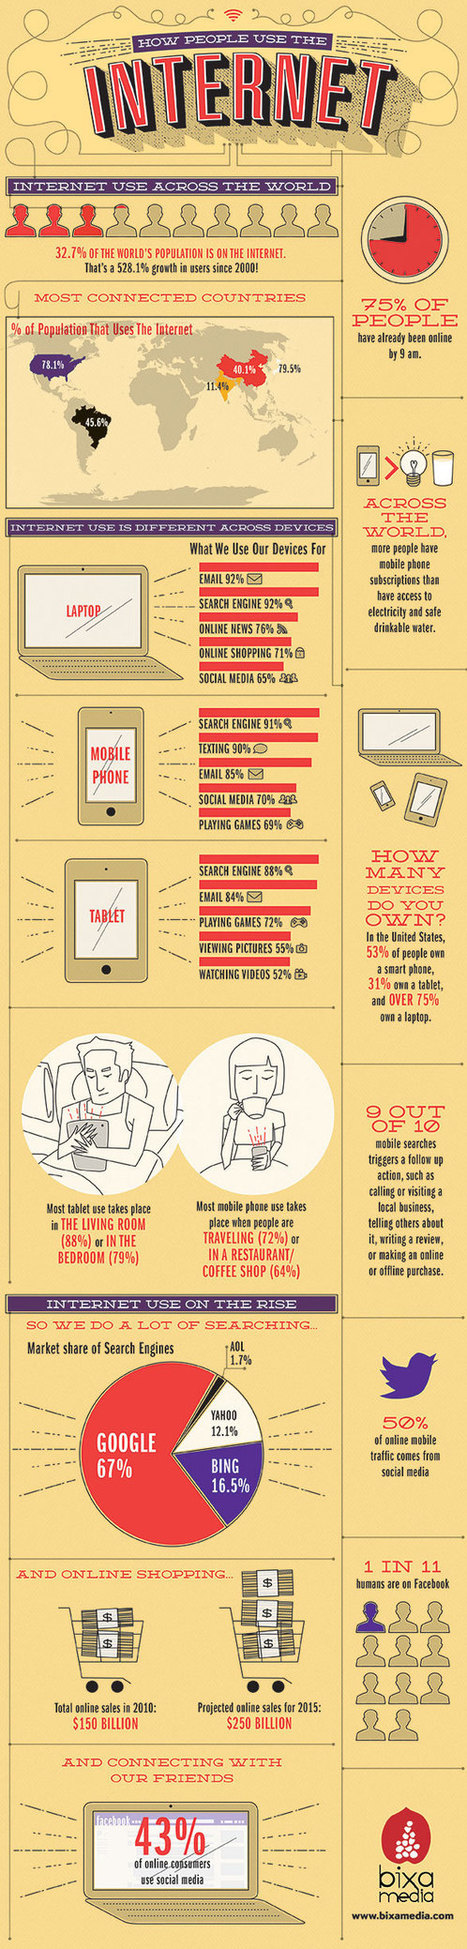 How People Use the Internet [INFOGRAPHIC] | Marketing_me | Scoop.it